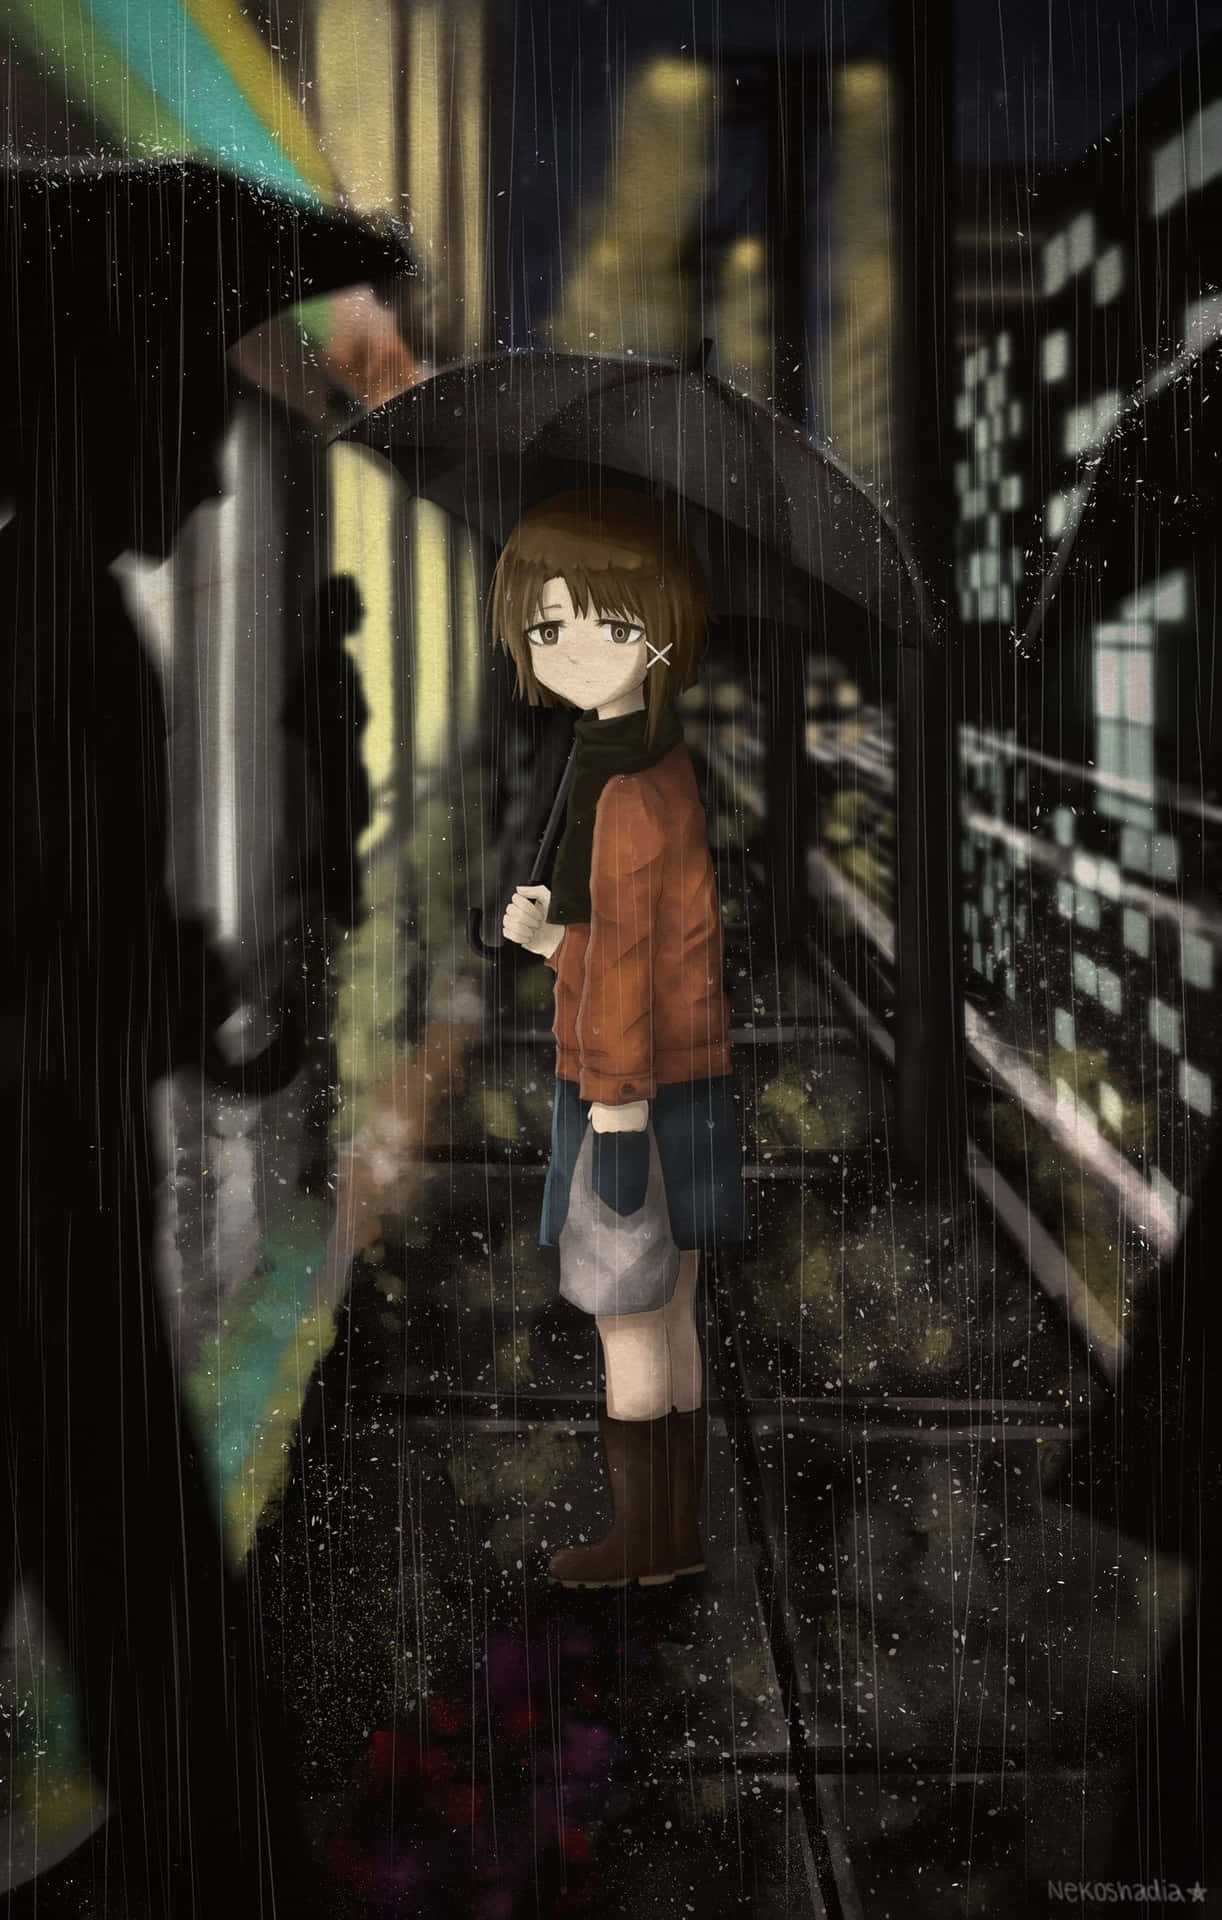 A Girl With An Umbrella Standing In The Rain Background